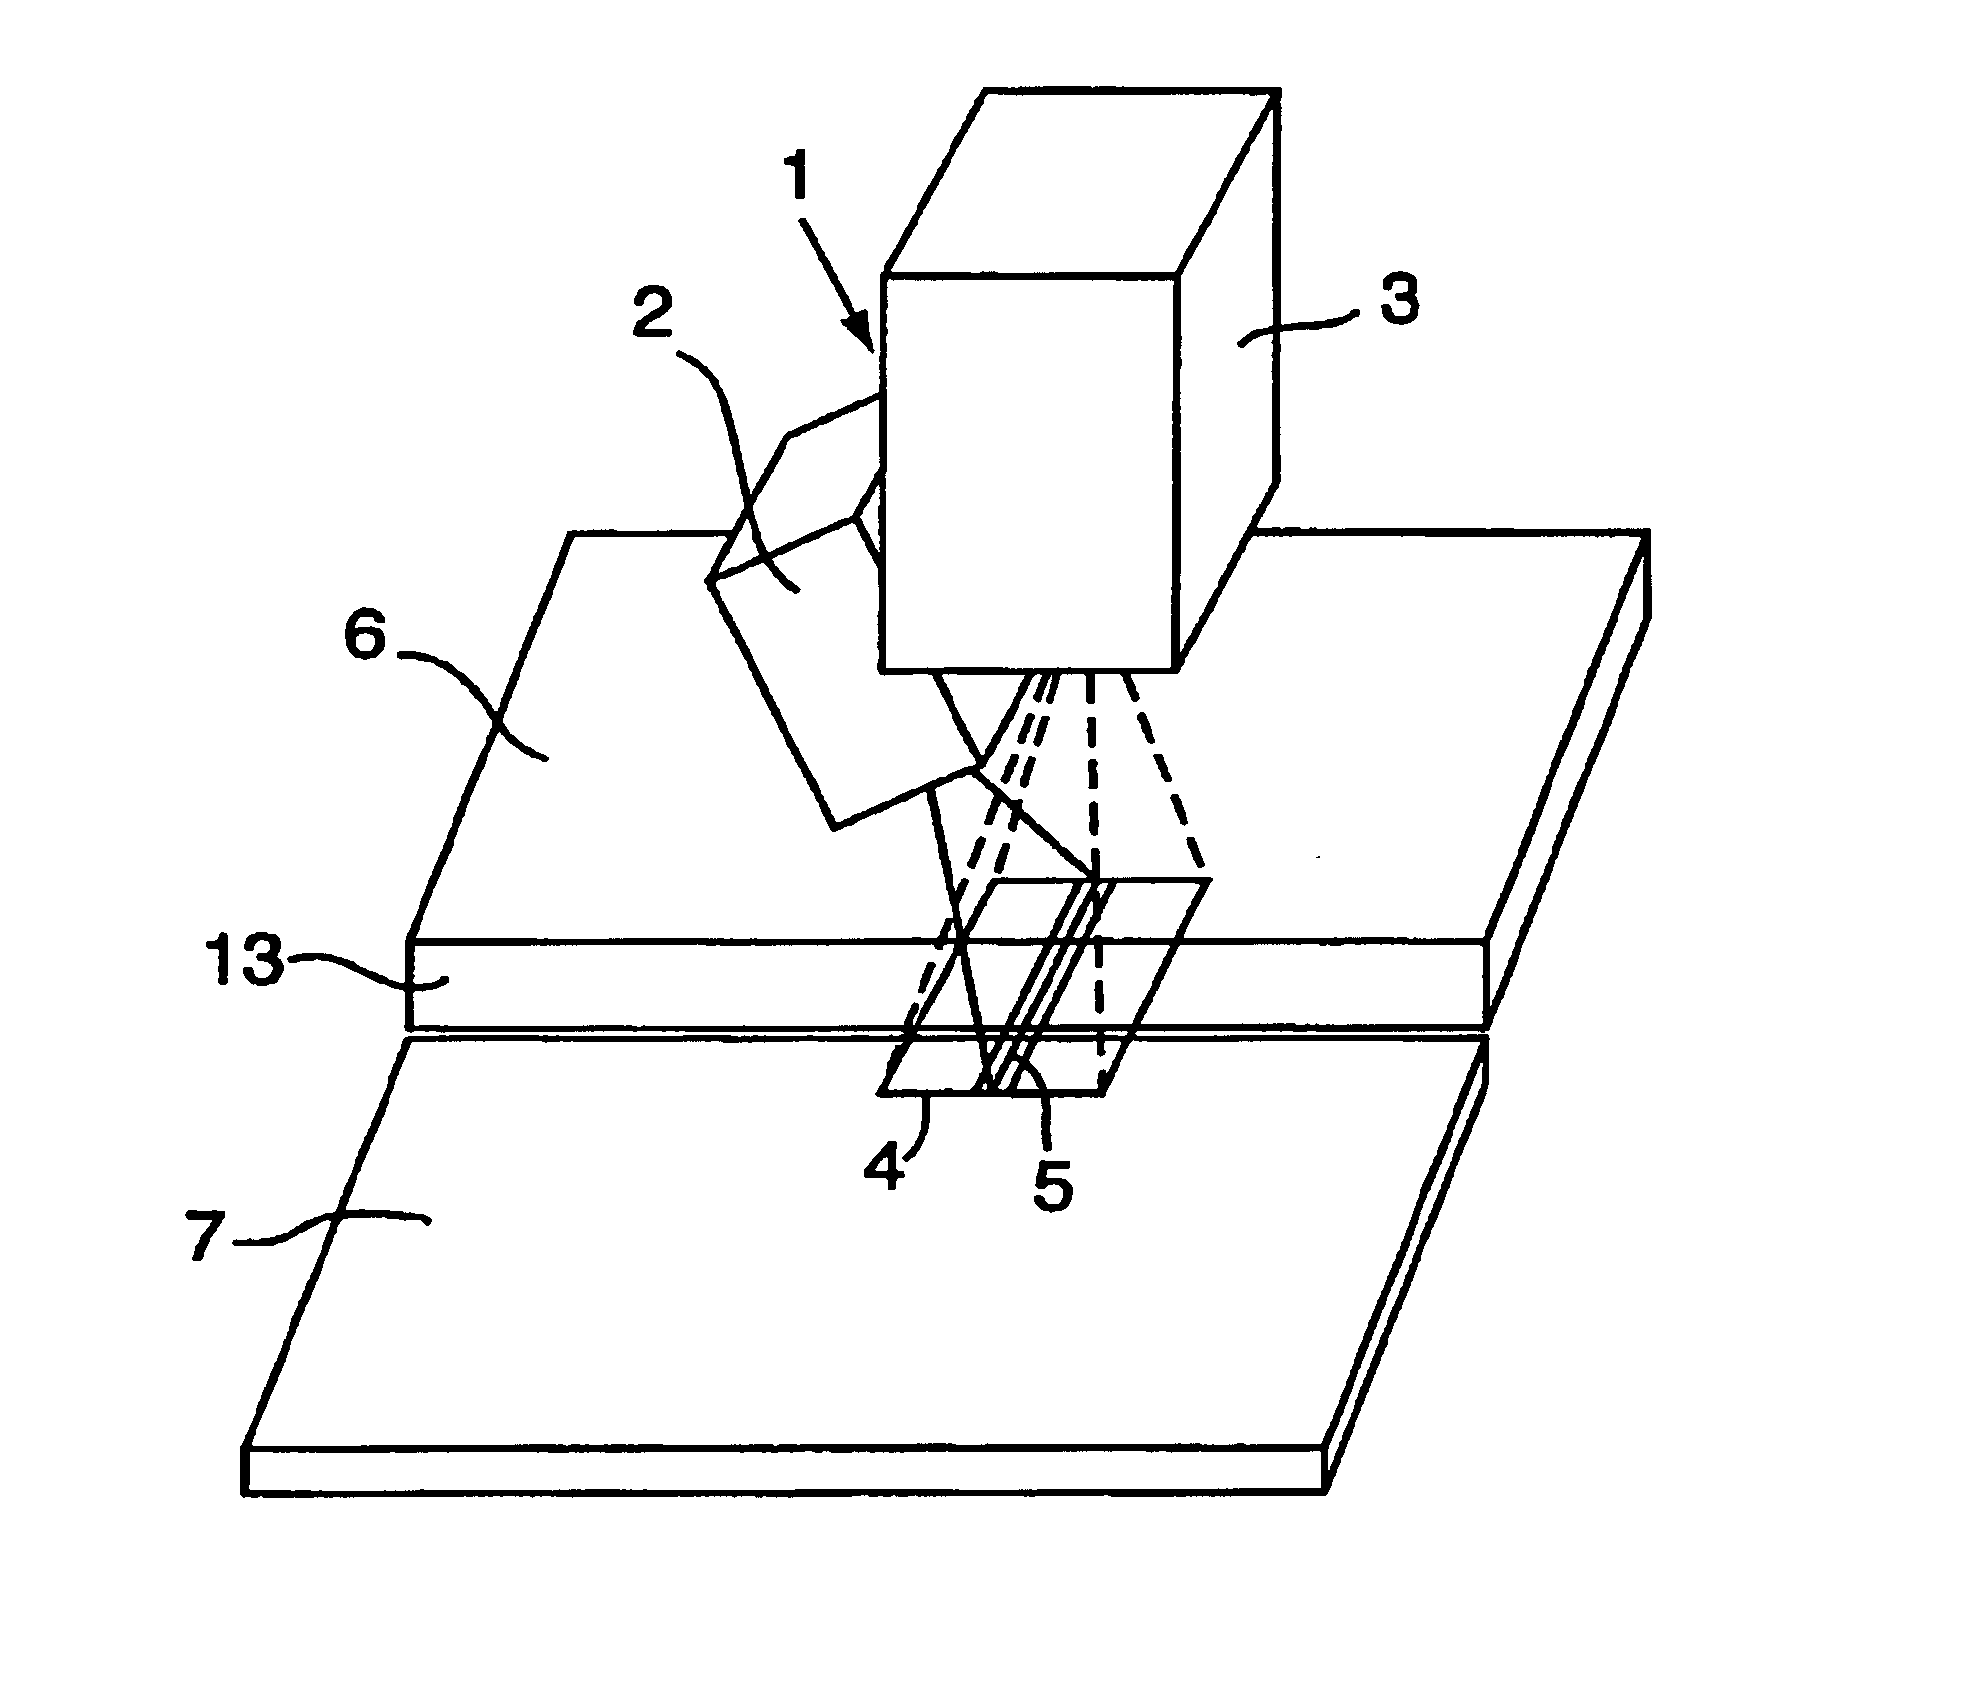 Method and apparatus for following and inspecting an edge or border